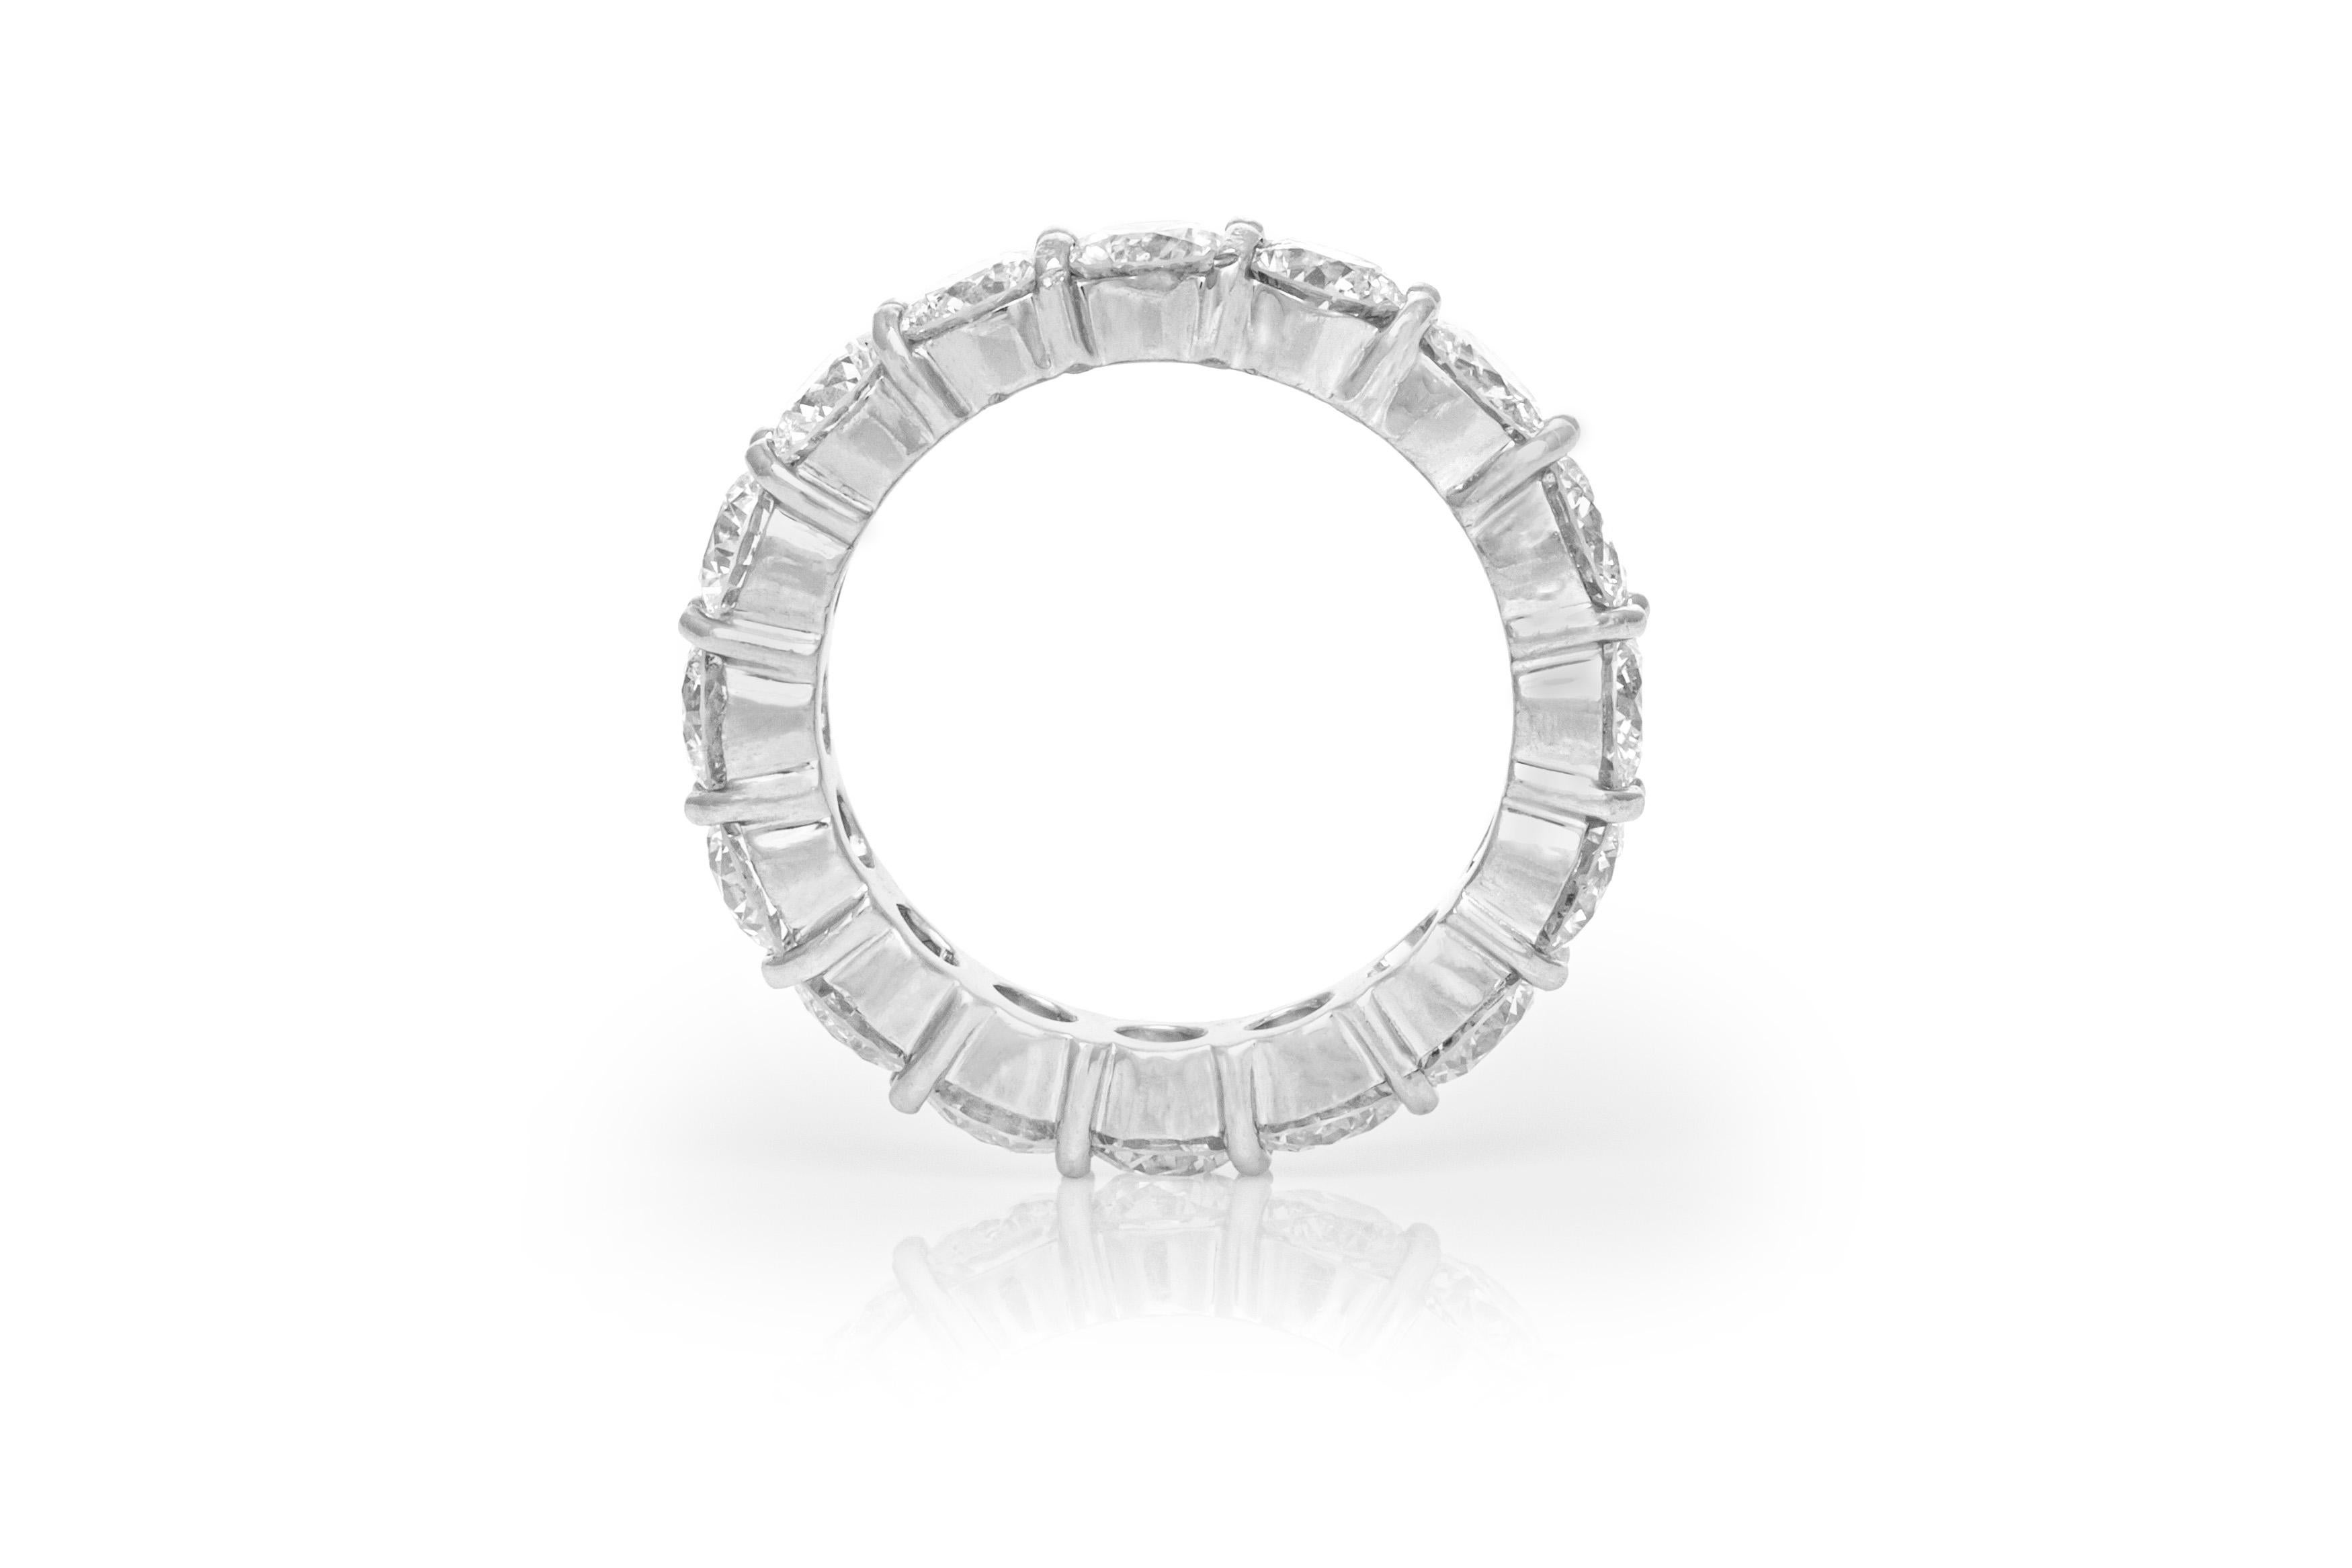 The ring is finely crafted in platinum with round diamonds all over weighing approximately total of 4.46 carat.